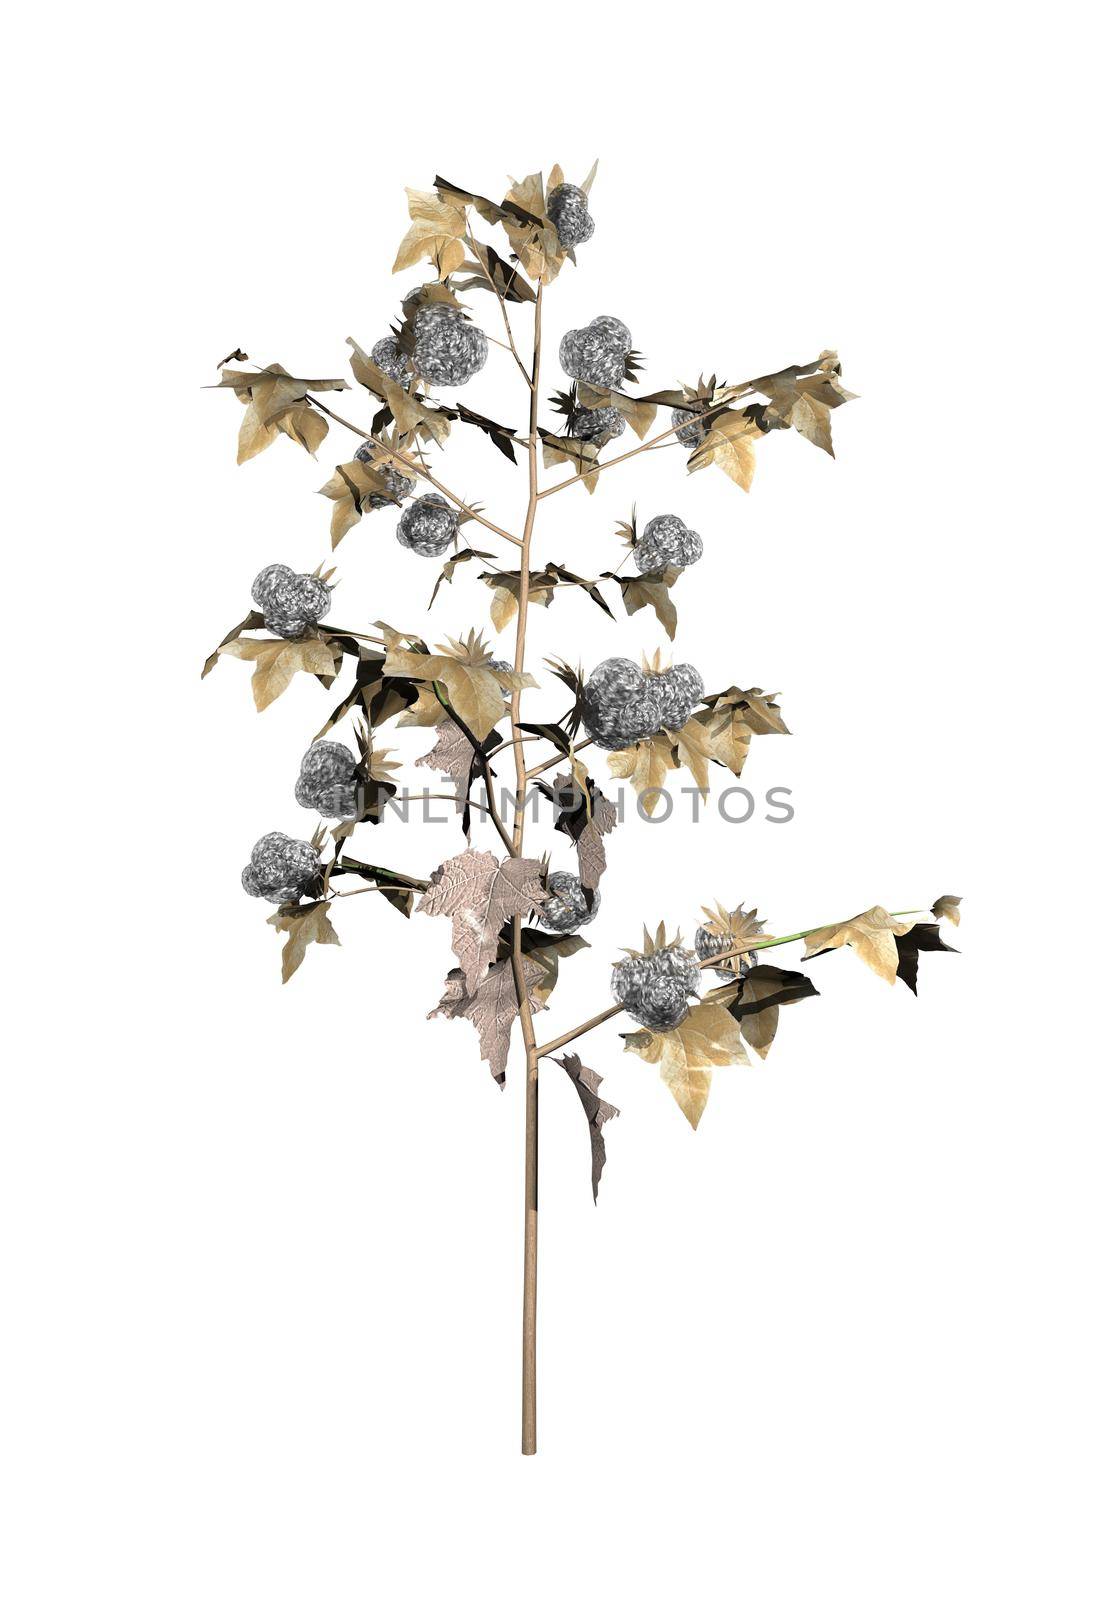 One mature cotton plant isolated in white background